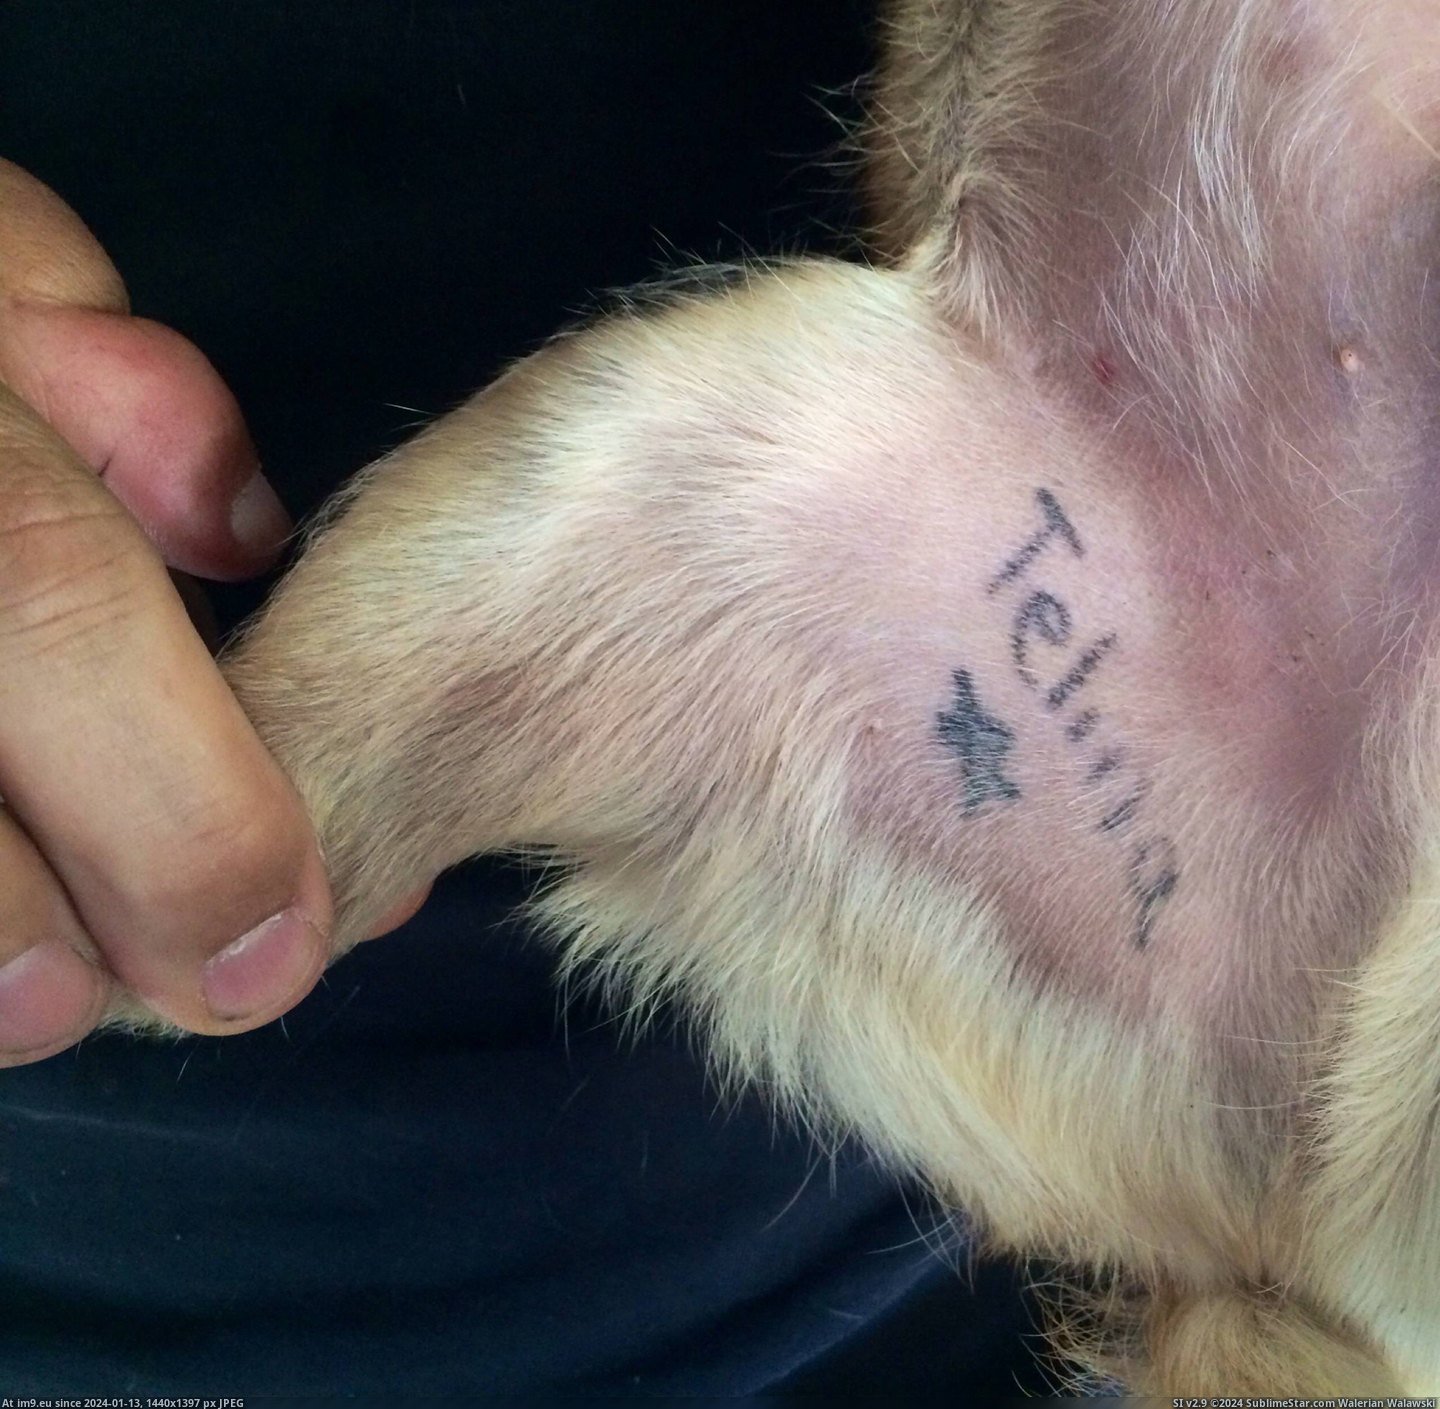 #Wtf #Tattoo #Parents #Adopted #Owner #Dog #Previous [Wtf] My parents adopted a dog. He has a tattoo from a previous owner. Pic. (Изображение из альбом My r/WTF favs))